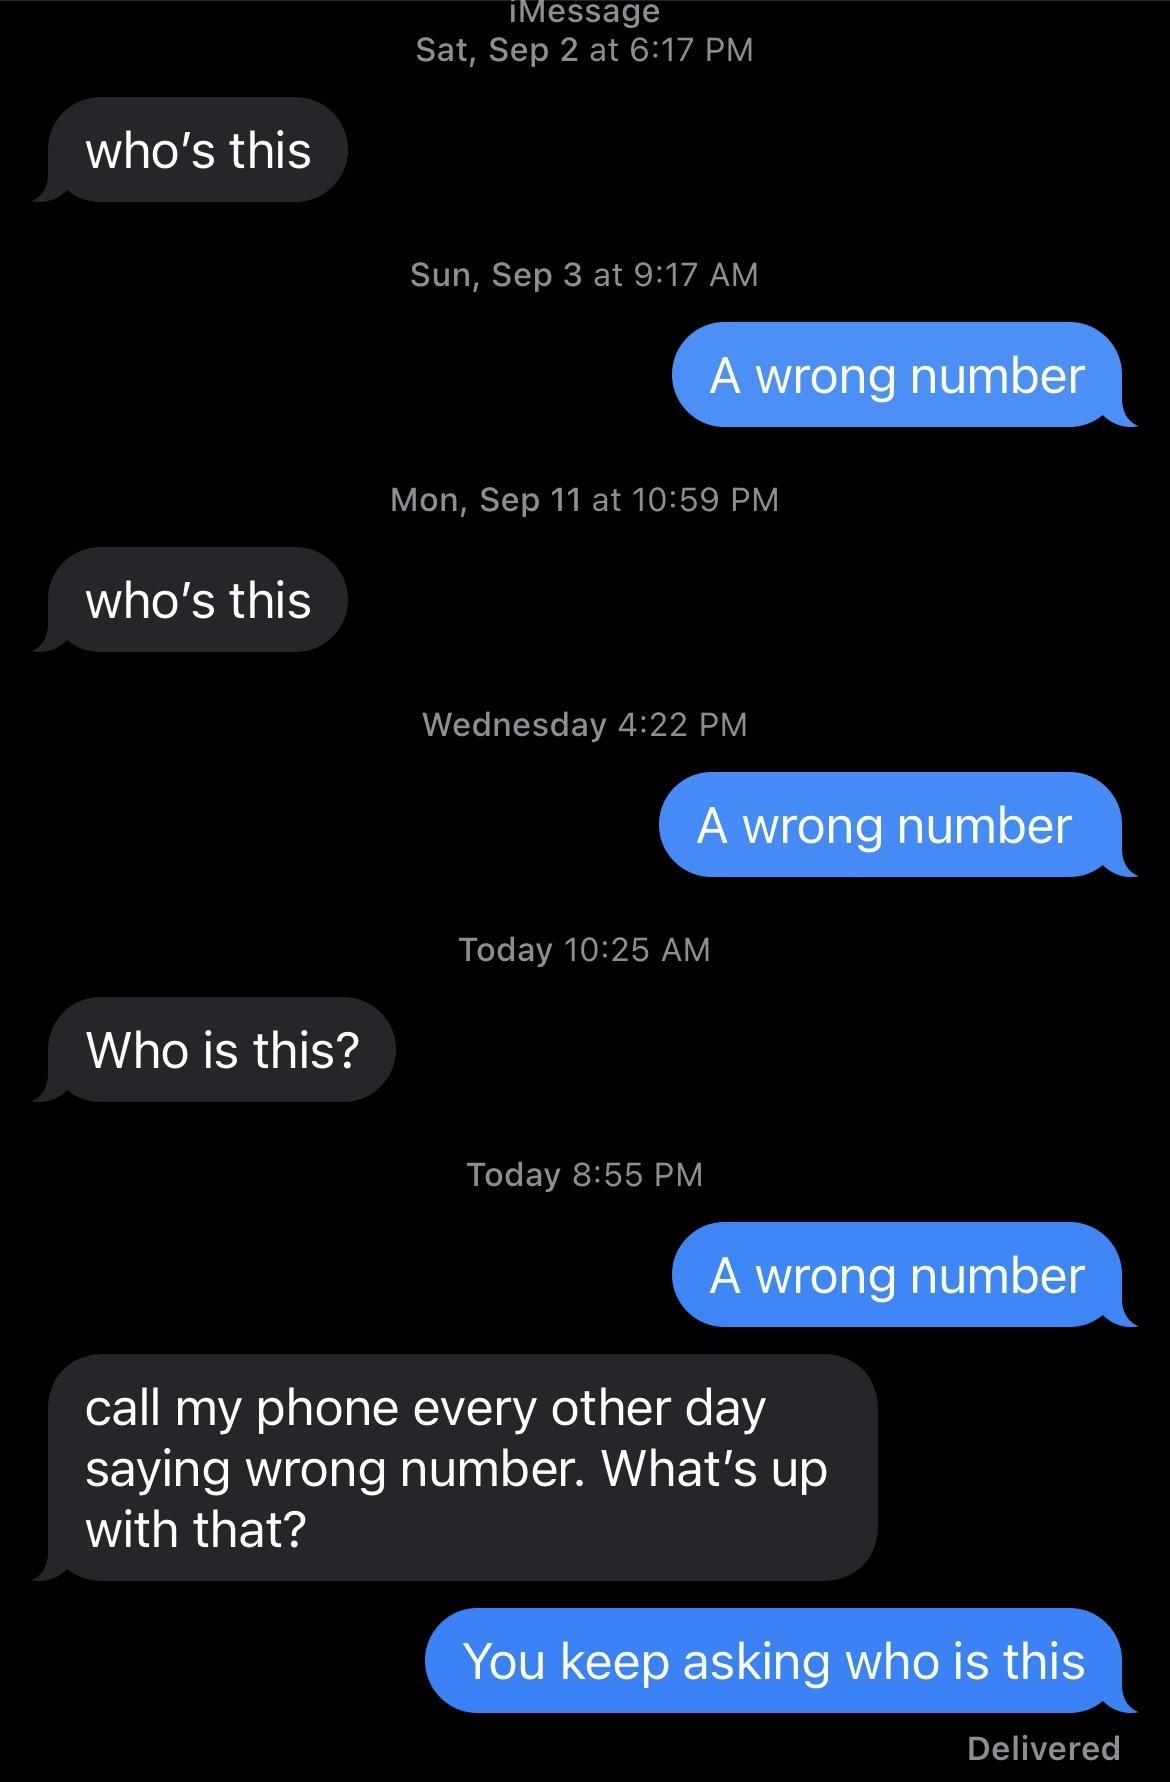 Text message exchange from September 2 to today. One person repeatedly asks &quot;who&#x27;s this,&quot; and the other person consistently replies &quot;A wrong number.&quot; Final reply says, &quot;You keep asking who is this.&quot;